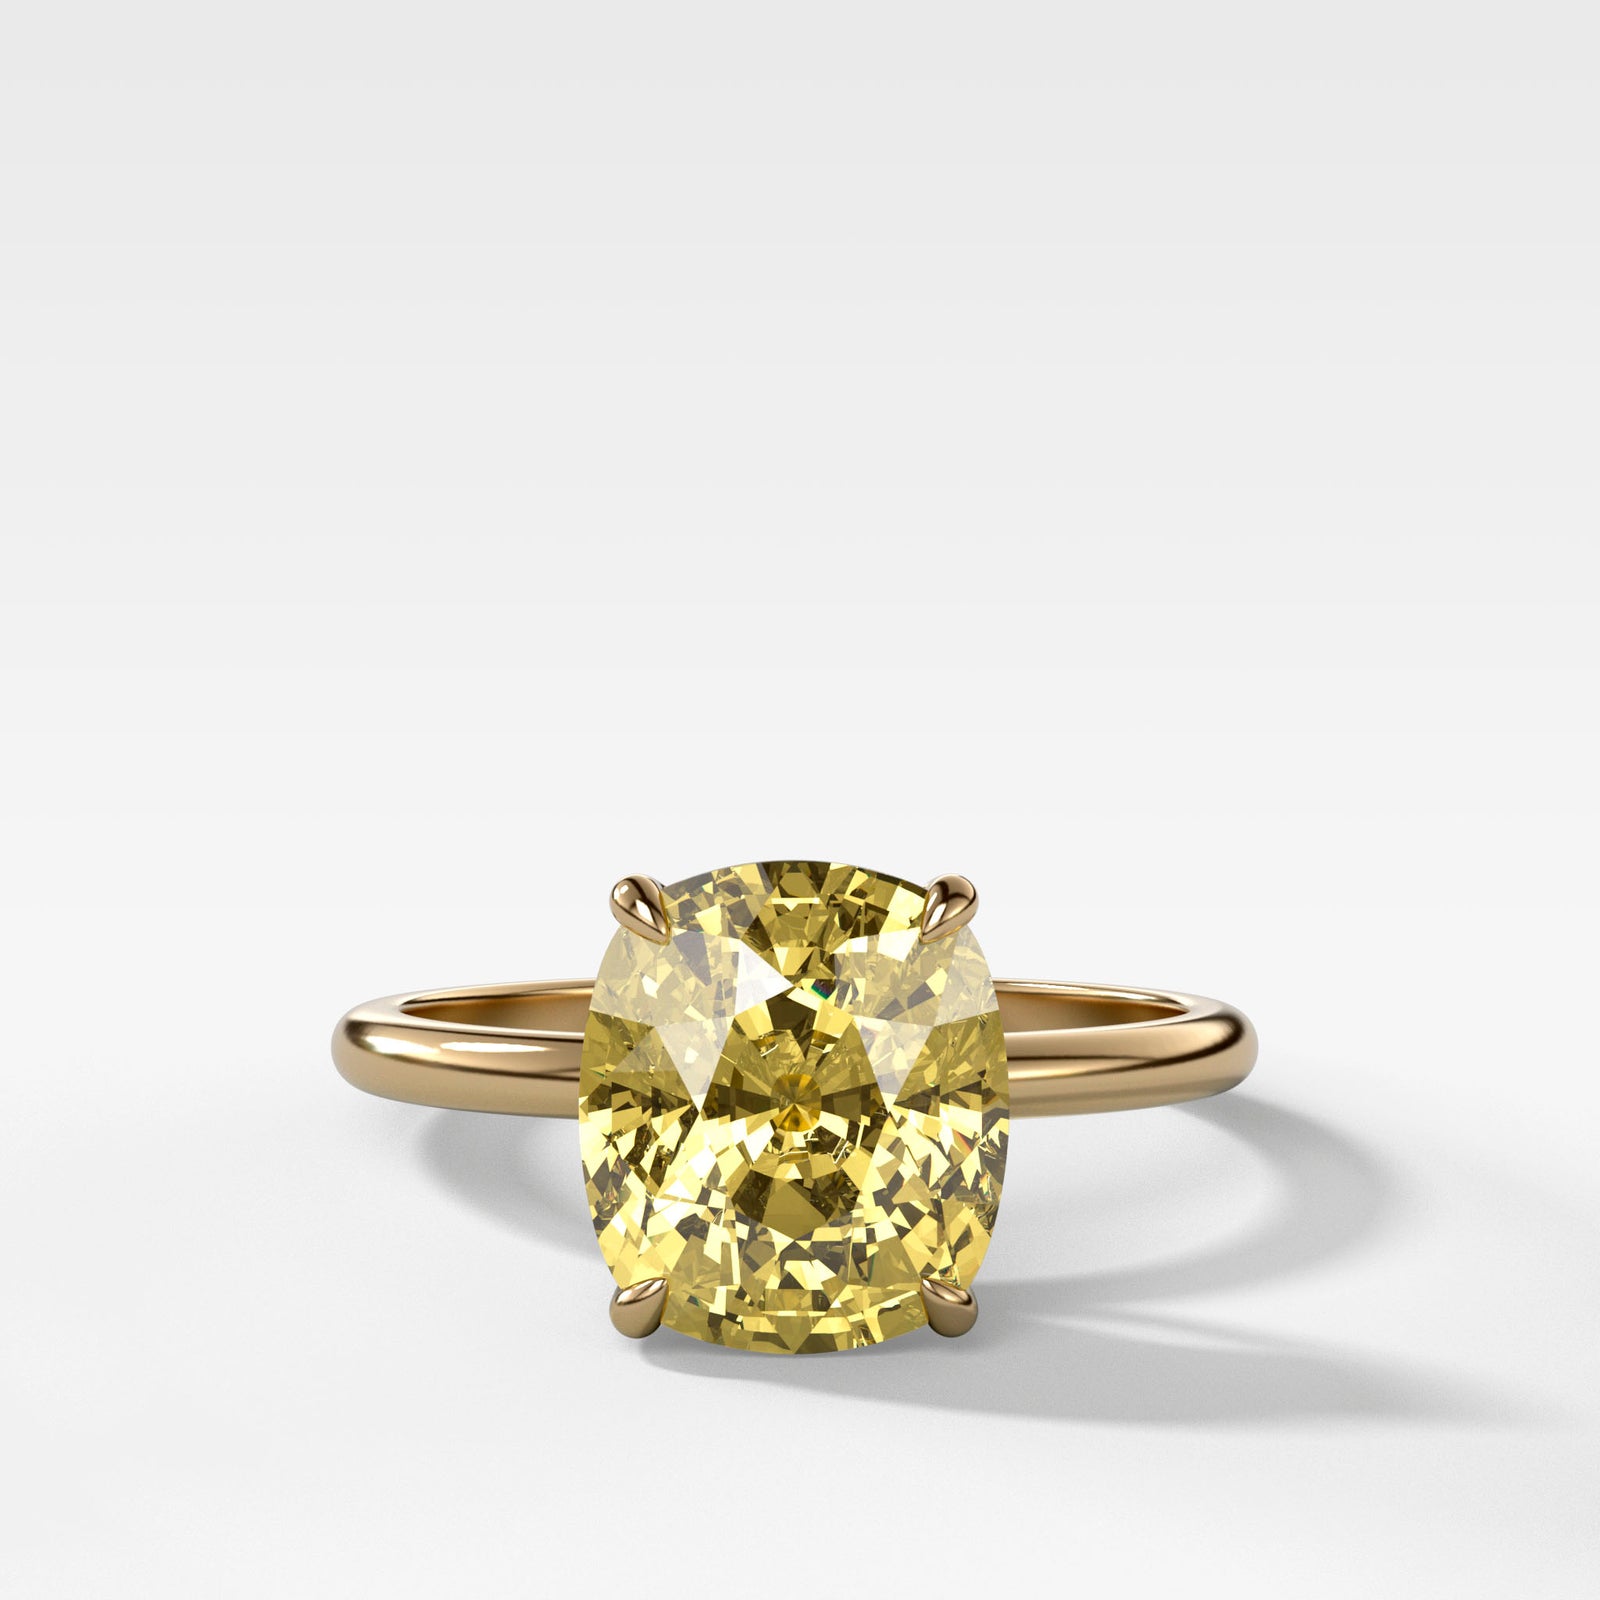 Yellow Diamond Engagement Rings: Everything You Need To Know in 2023